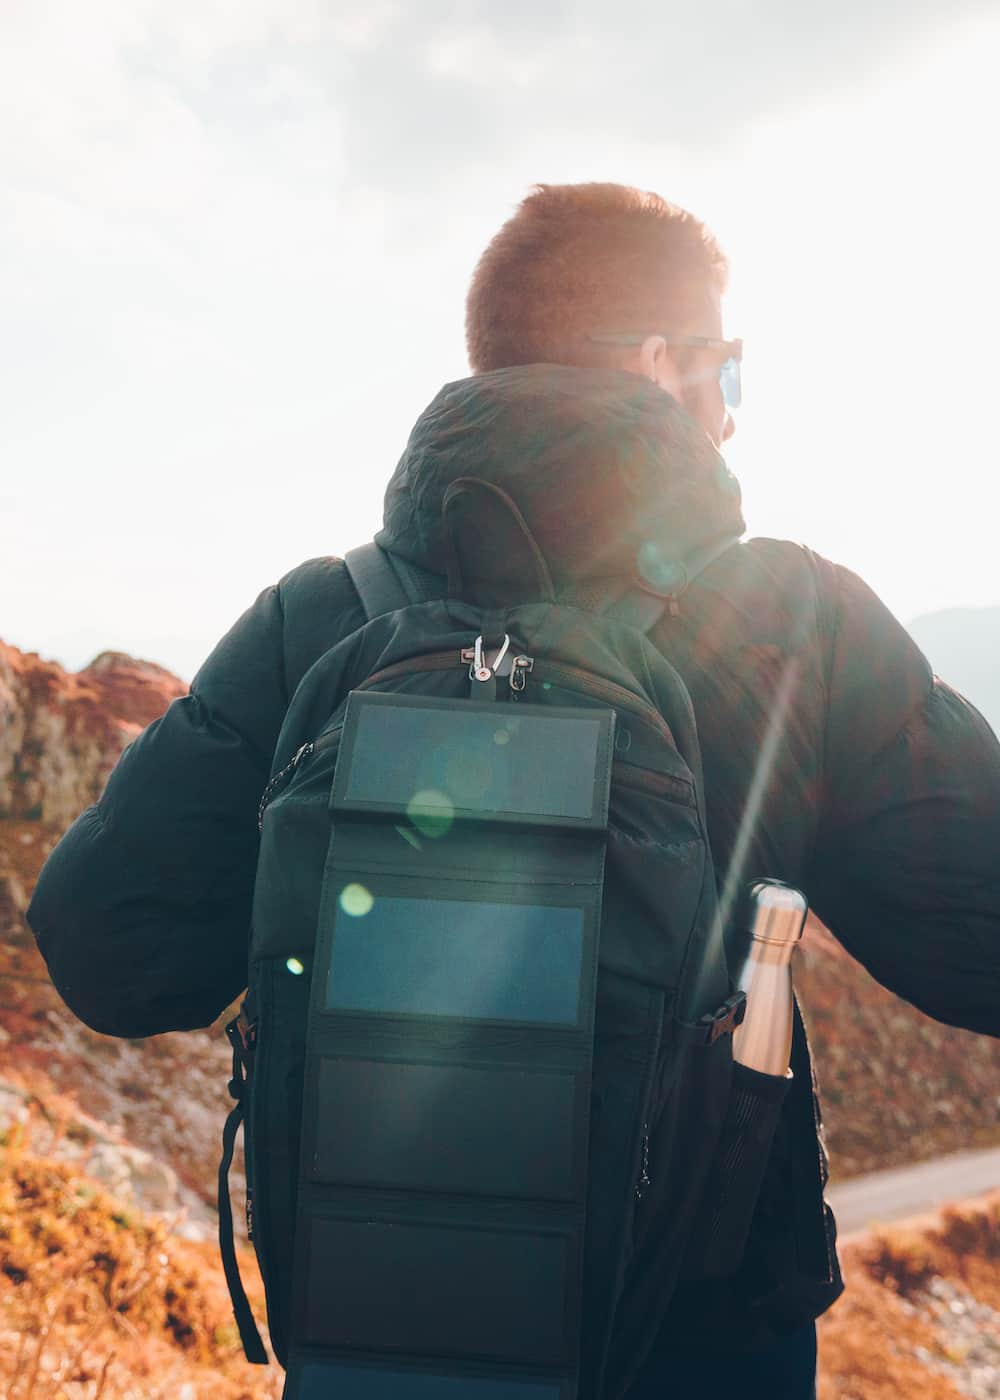 Sunslice's newest solar power bank, the Electron, charging in the sun on a backpack during hiking